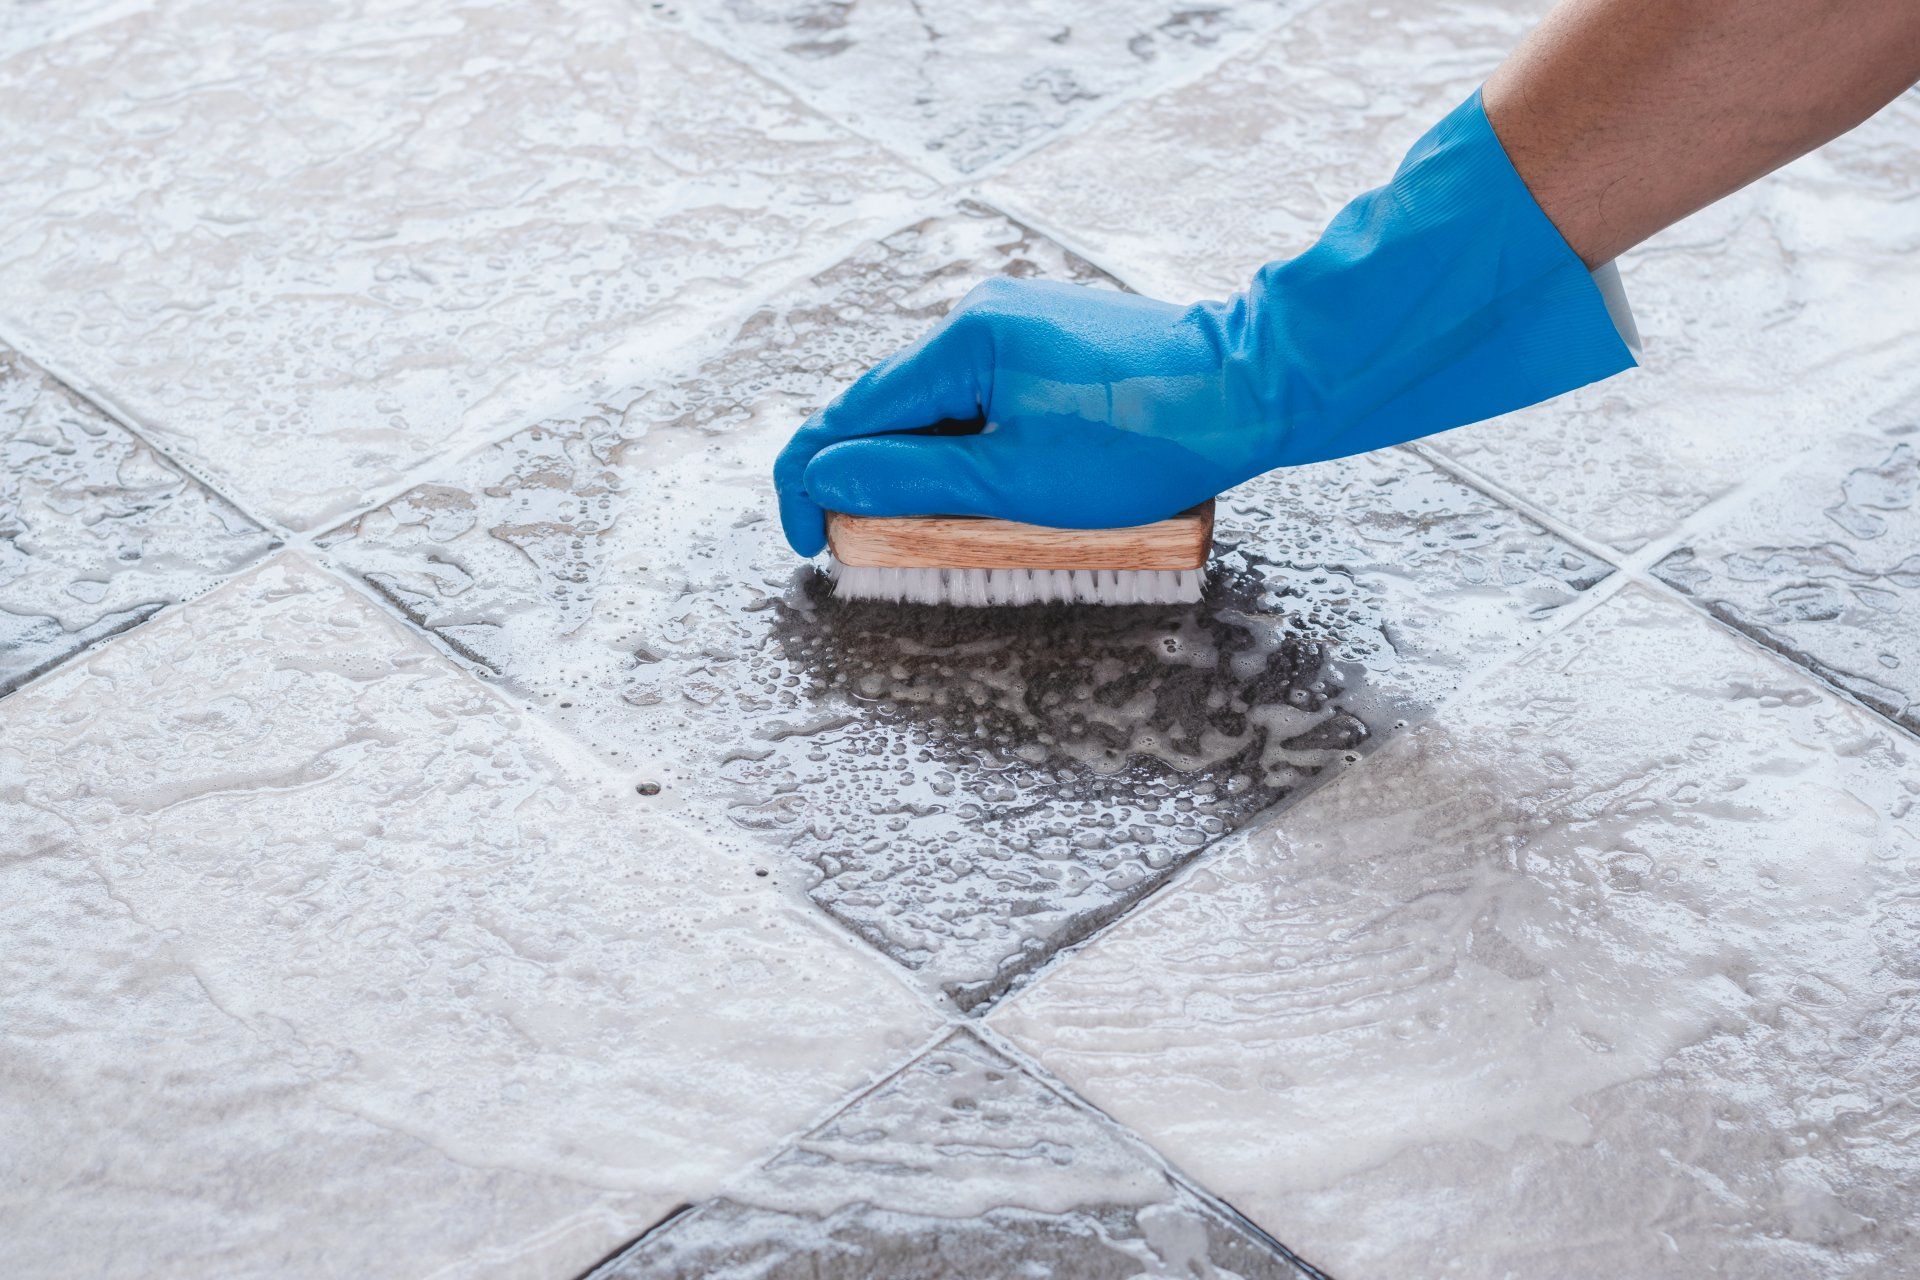 Hand of man wearing blue rubber gloves is used to convert scrub cleaning on the tile floor.